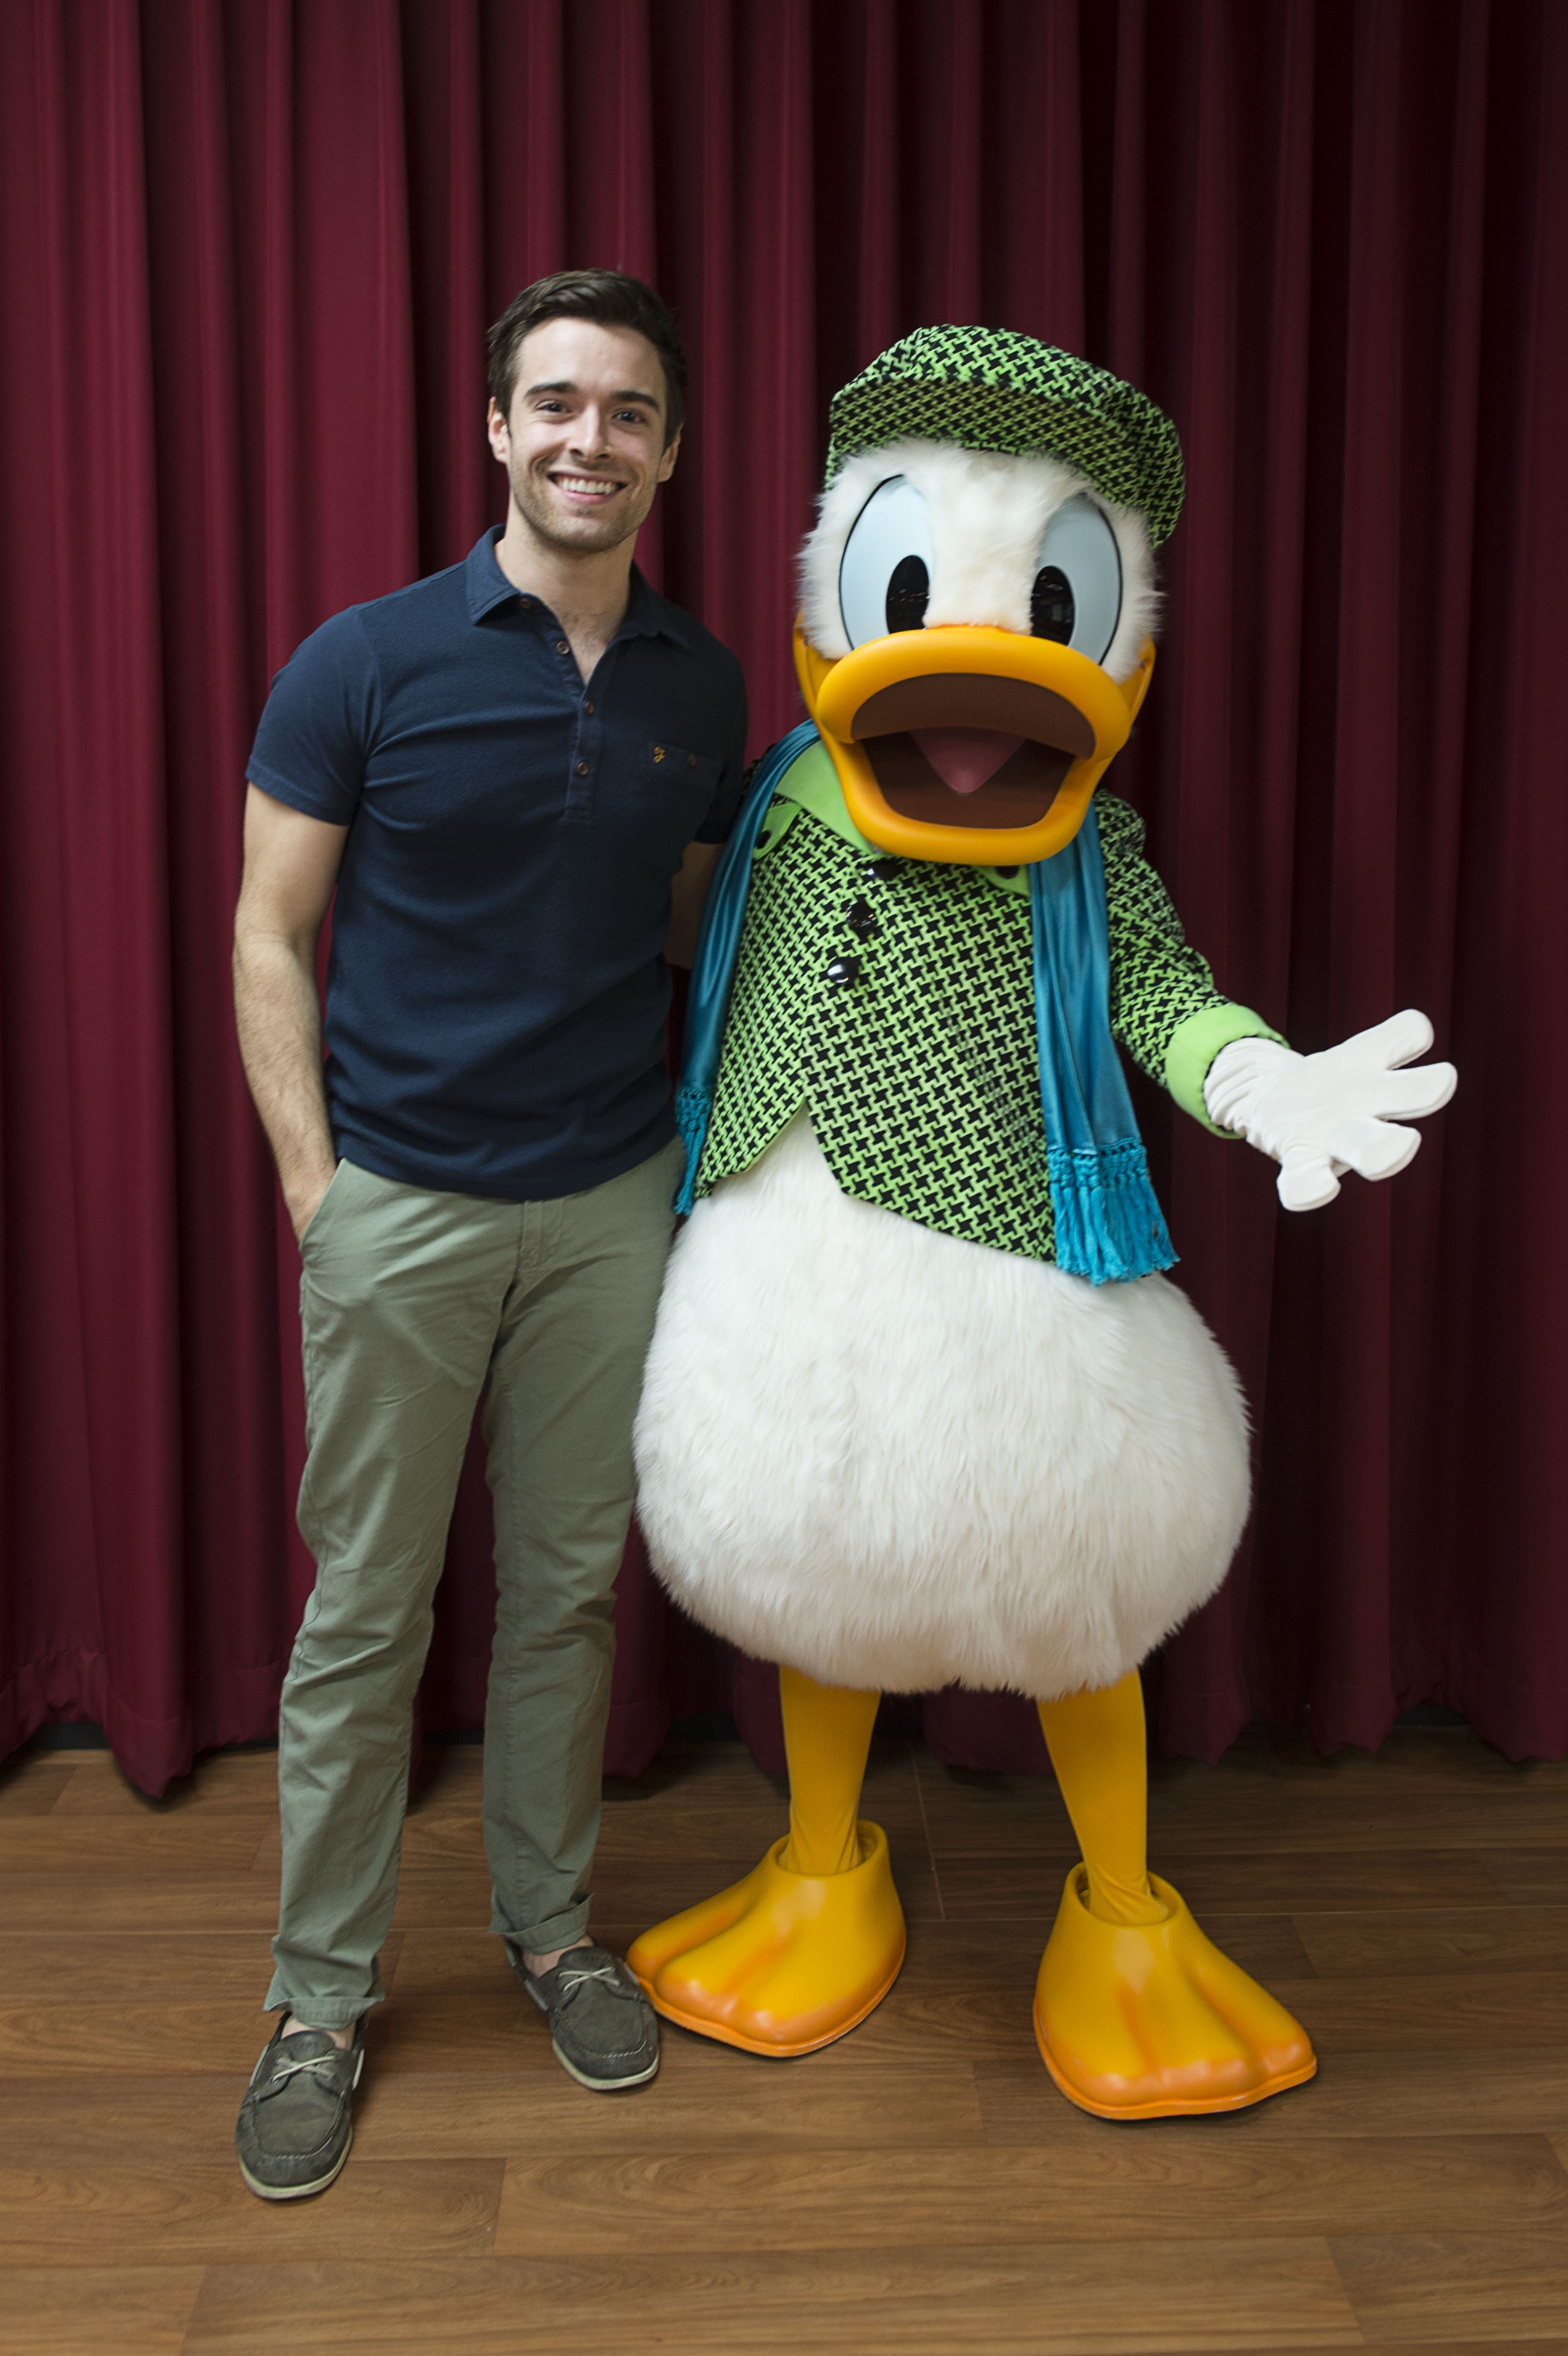 Former “Newsies” Star Returns to Disney Roots for a Special Disney Performing Arts Workshop Visit